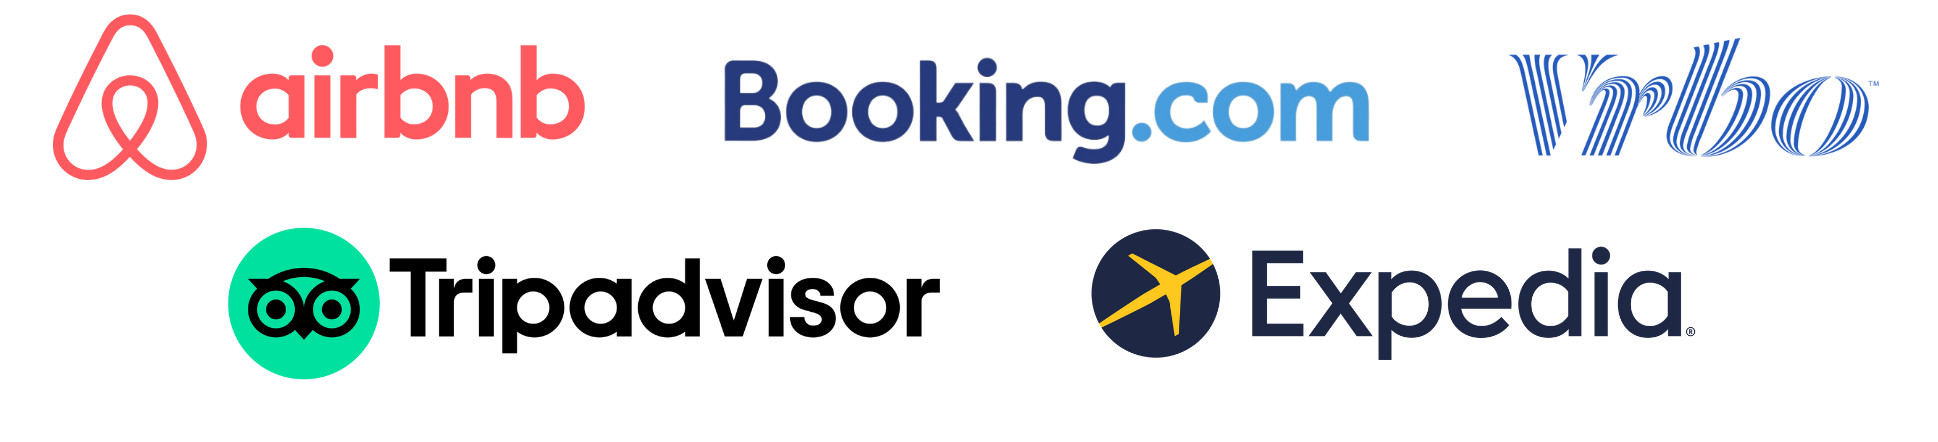 image of online rental booking websites to manage listings